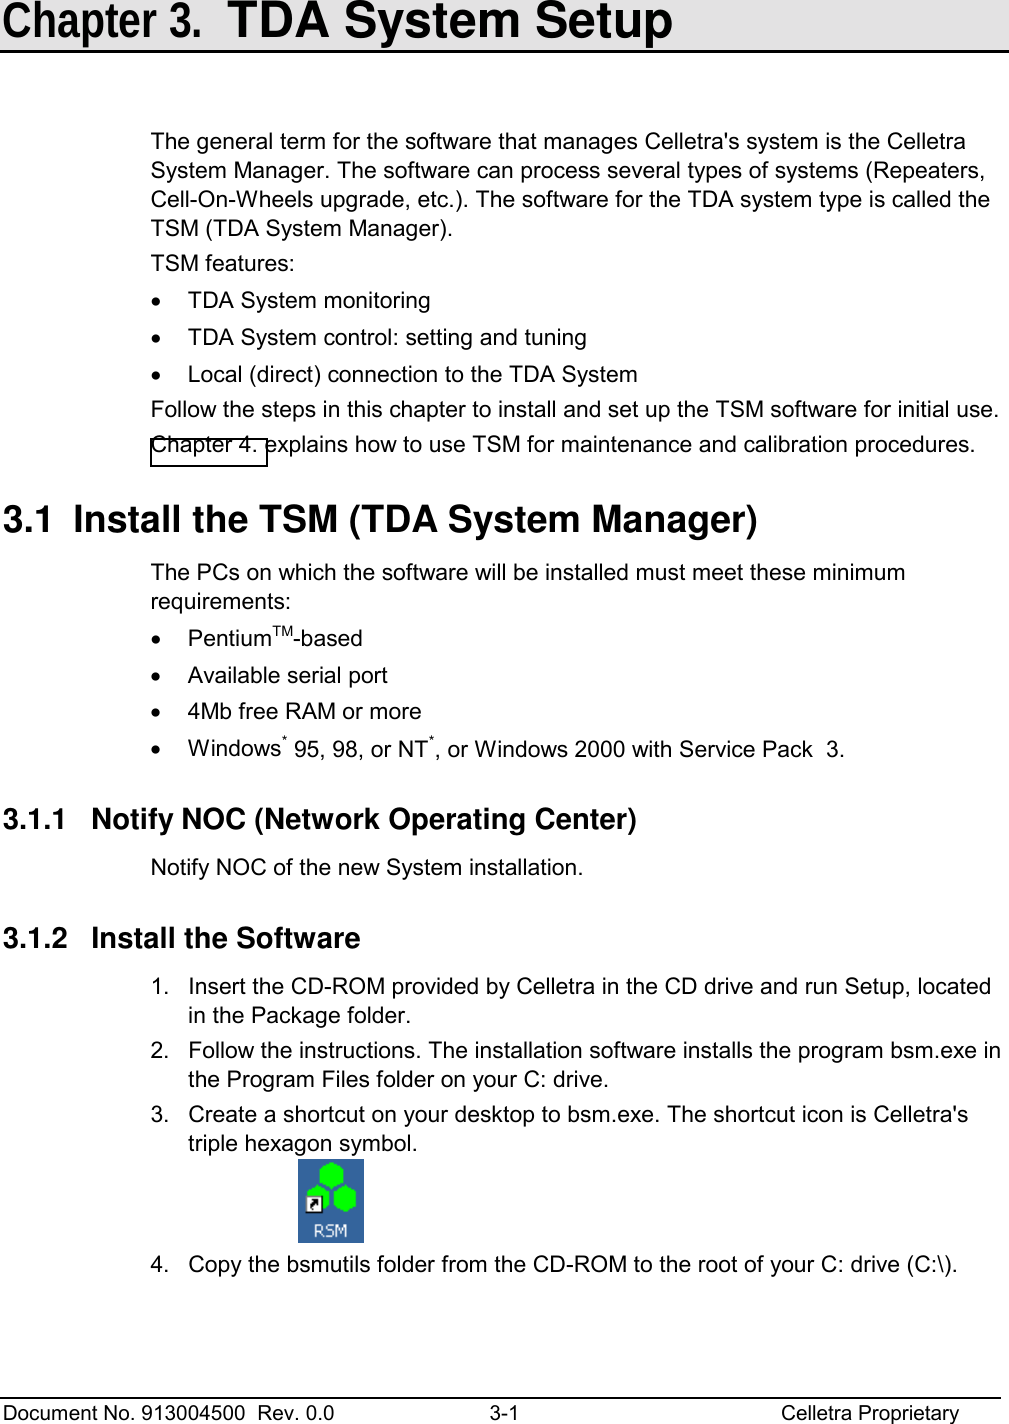  Document No. 913004500  Rev. 0.0  3-1  Celletra Proprietary   Chapter 3.  TDA System Setup  The general term for the software that manages Celletra&apos;s system is the Celletra System Manager. The software can process several types of systems (Repeaters, Cell-On-Wheels upgrade, etc.). The software for the TDA system type is called the TSM (TDA System Manager). TSM features: •  TDA System monitoring •  TDA System control: setting and tuning •  Local (direct) connection to the TDA System Follow the steps in this chapter to install and set up the TSM software for initial use.  Chapter 4. explains how to use TSM for maintenance and calibration procedures. 3.1  Install the TSM (TDA System Manager) The PCs on which the software will be installed must meet these minimum requirements:  •  PentiumTM-based  •  Available serial port  •  4Mb free RAM or more •  Windows* 95, 98, or NT*, or Windows 2000 with Service Pack  3. 3.1.1  Notify NOC (Network Operating Center) Notify NOC of the new System installation. 3.1.2  Install the Software 1.  Insert the CD-ROM provided by Celletra in the CD drive and run Setup, located in the Package folder. 2.  Follow the instructions. The installation software installs the program bsm.exe in the Program Files folder on your C: drive. 3.  Create a shortcut on your desktop to bsm.exe. The shortcut icon is Celletra&apos;s triple hexagon symbol.    4.  Copy the bsmutils folder from the CD-ROM to the root of your C: drive (C:\).  